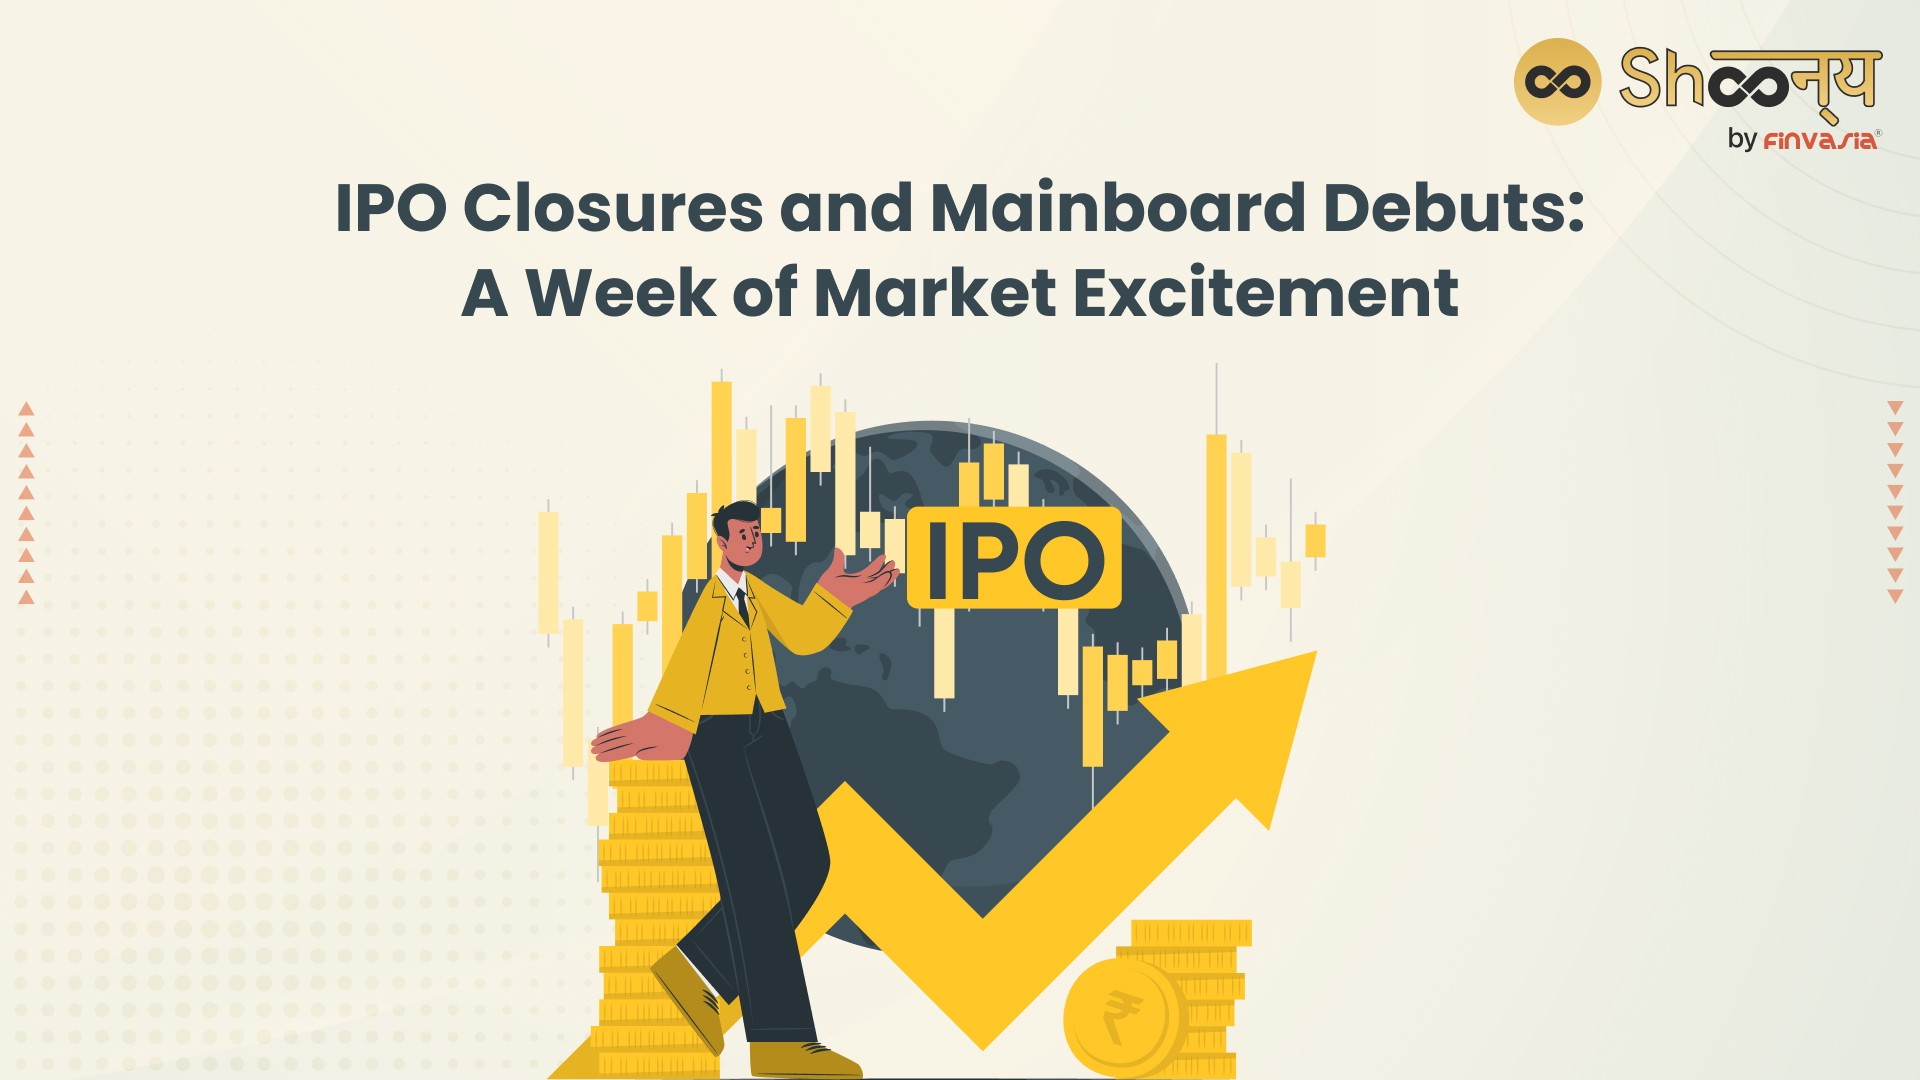 
  IPO Closings and Mainboard Debuts This Week: Know the Key Details